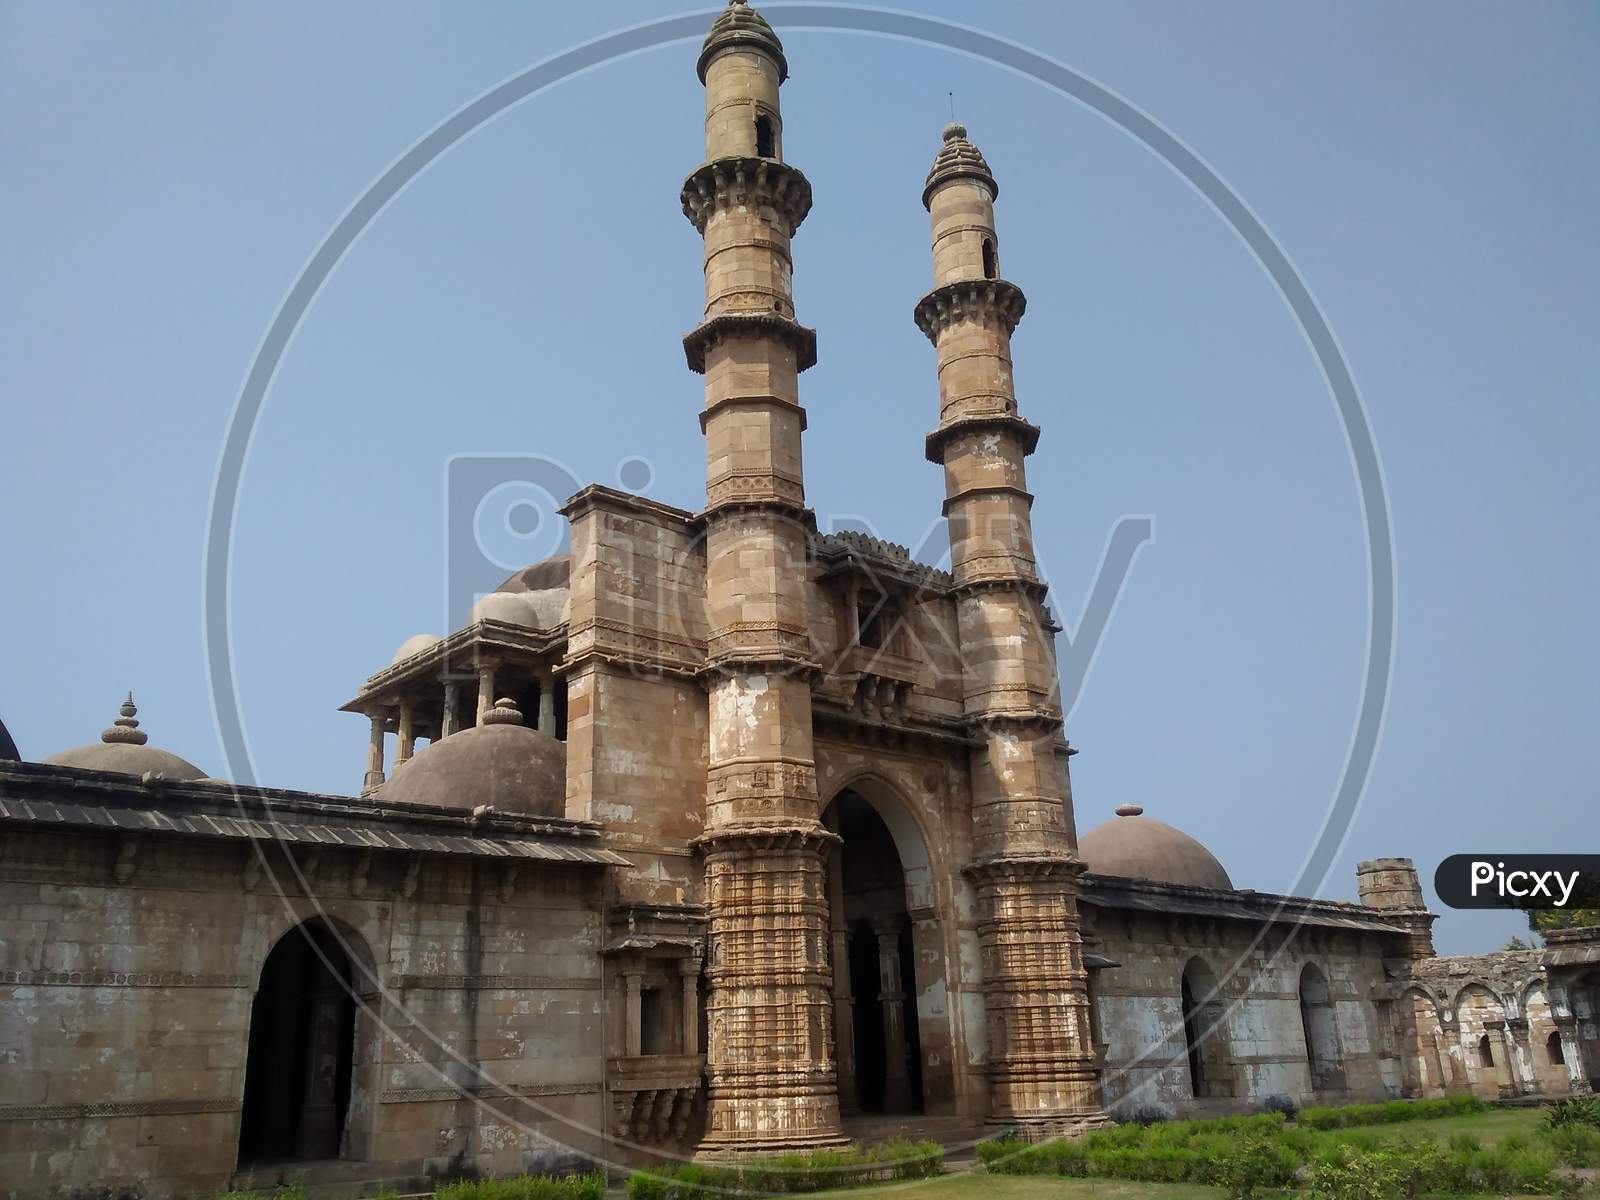 Jami masjid at Champaner-Pavagadh Archaeological Park. A UNESCO world heritage site in Gujarat, India